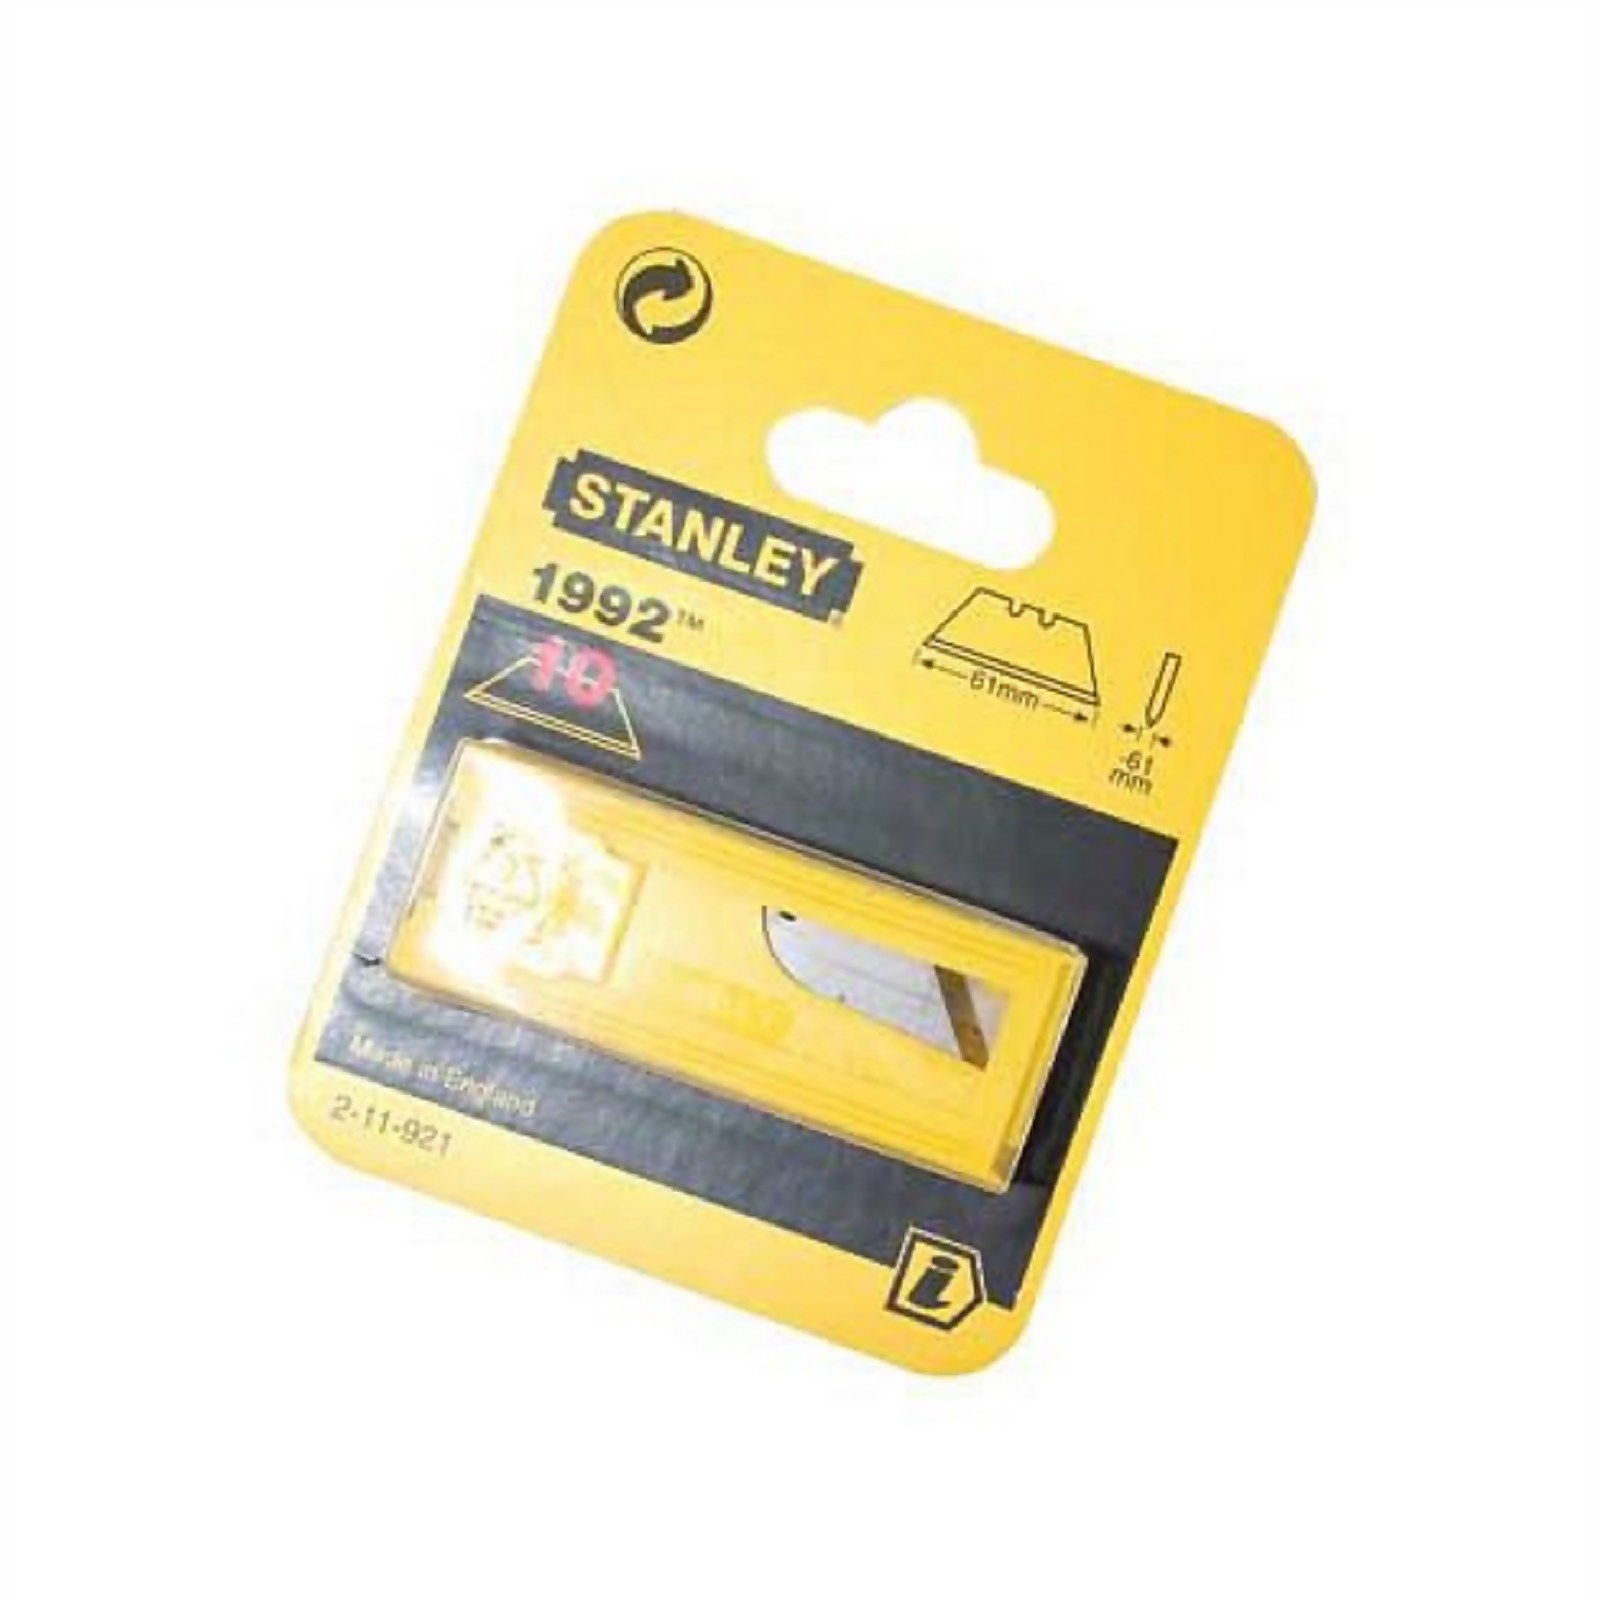 Photo of Stanley Heavy Duty Knife Blades - 10 Pack